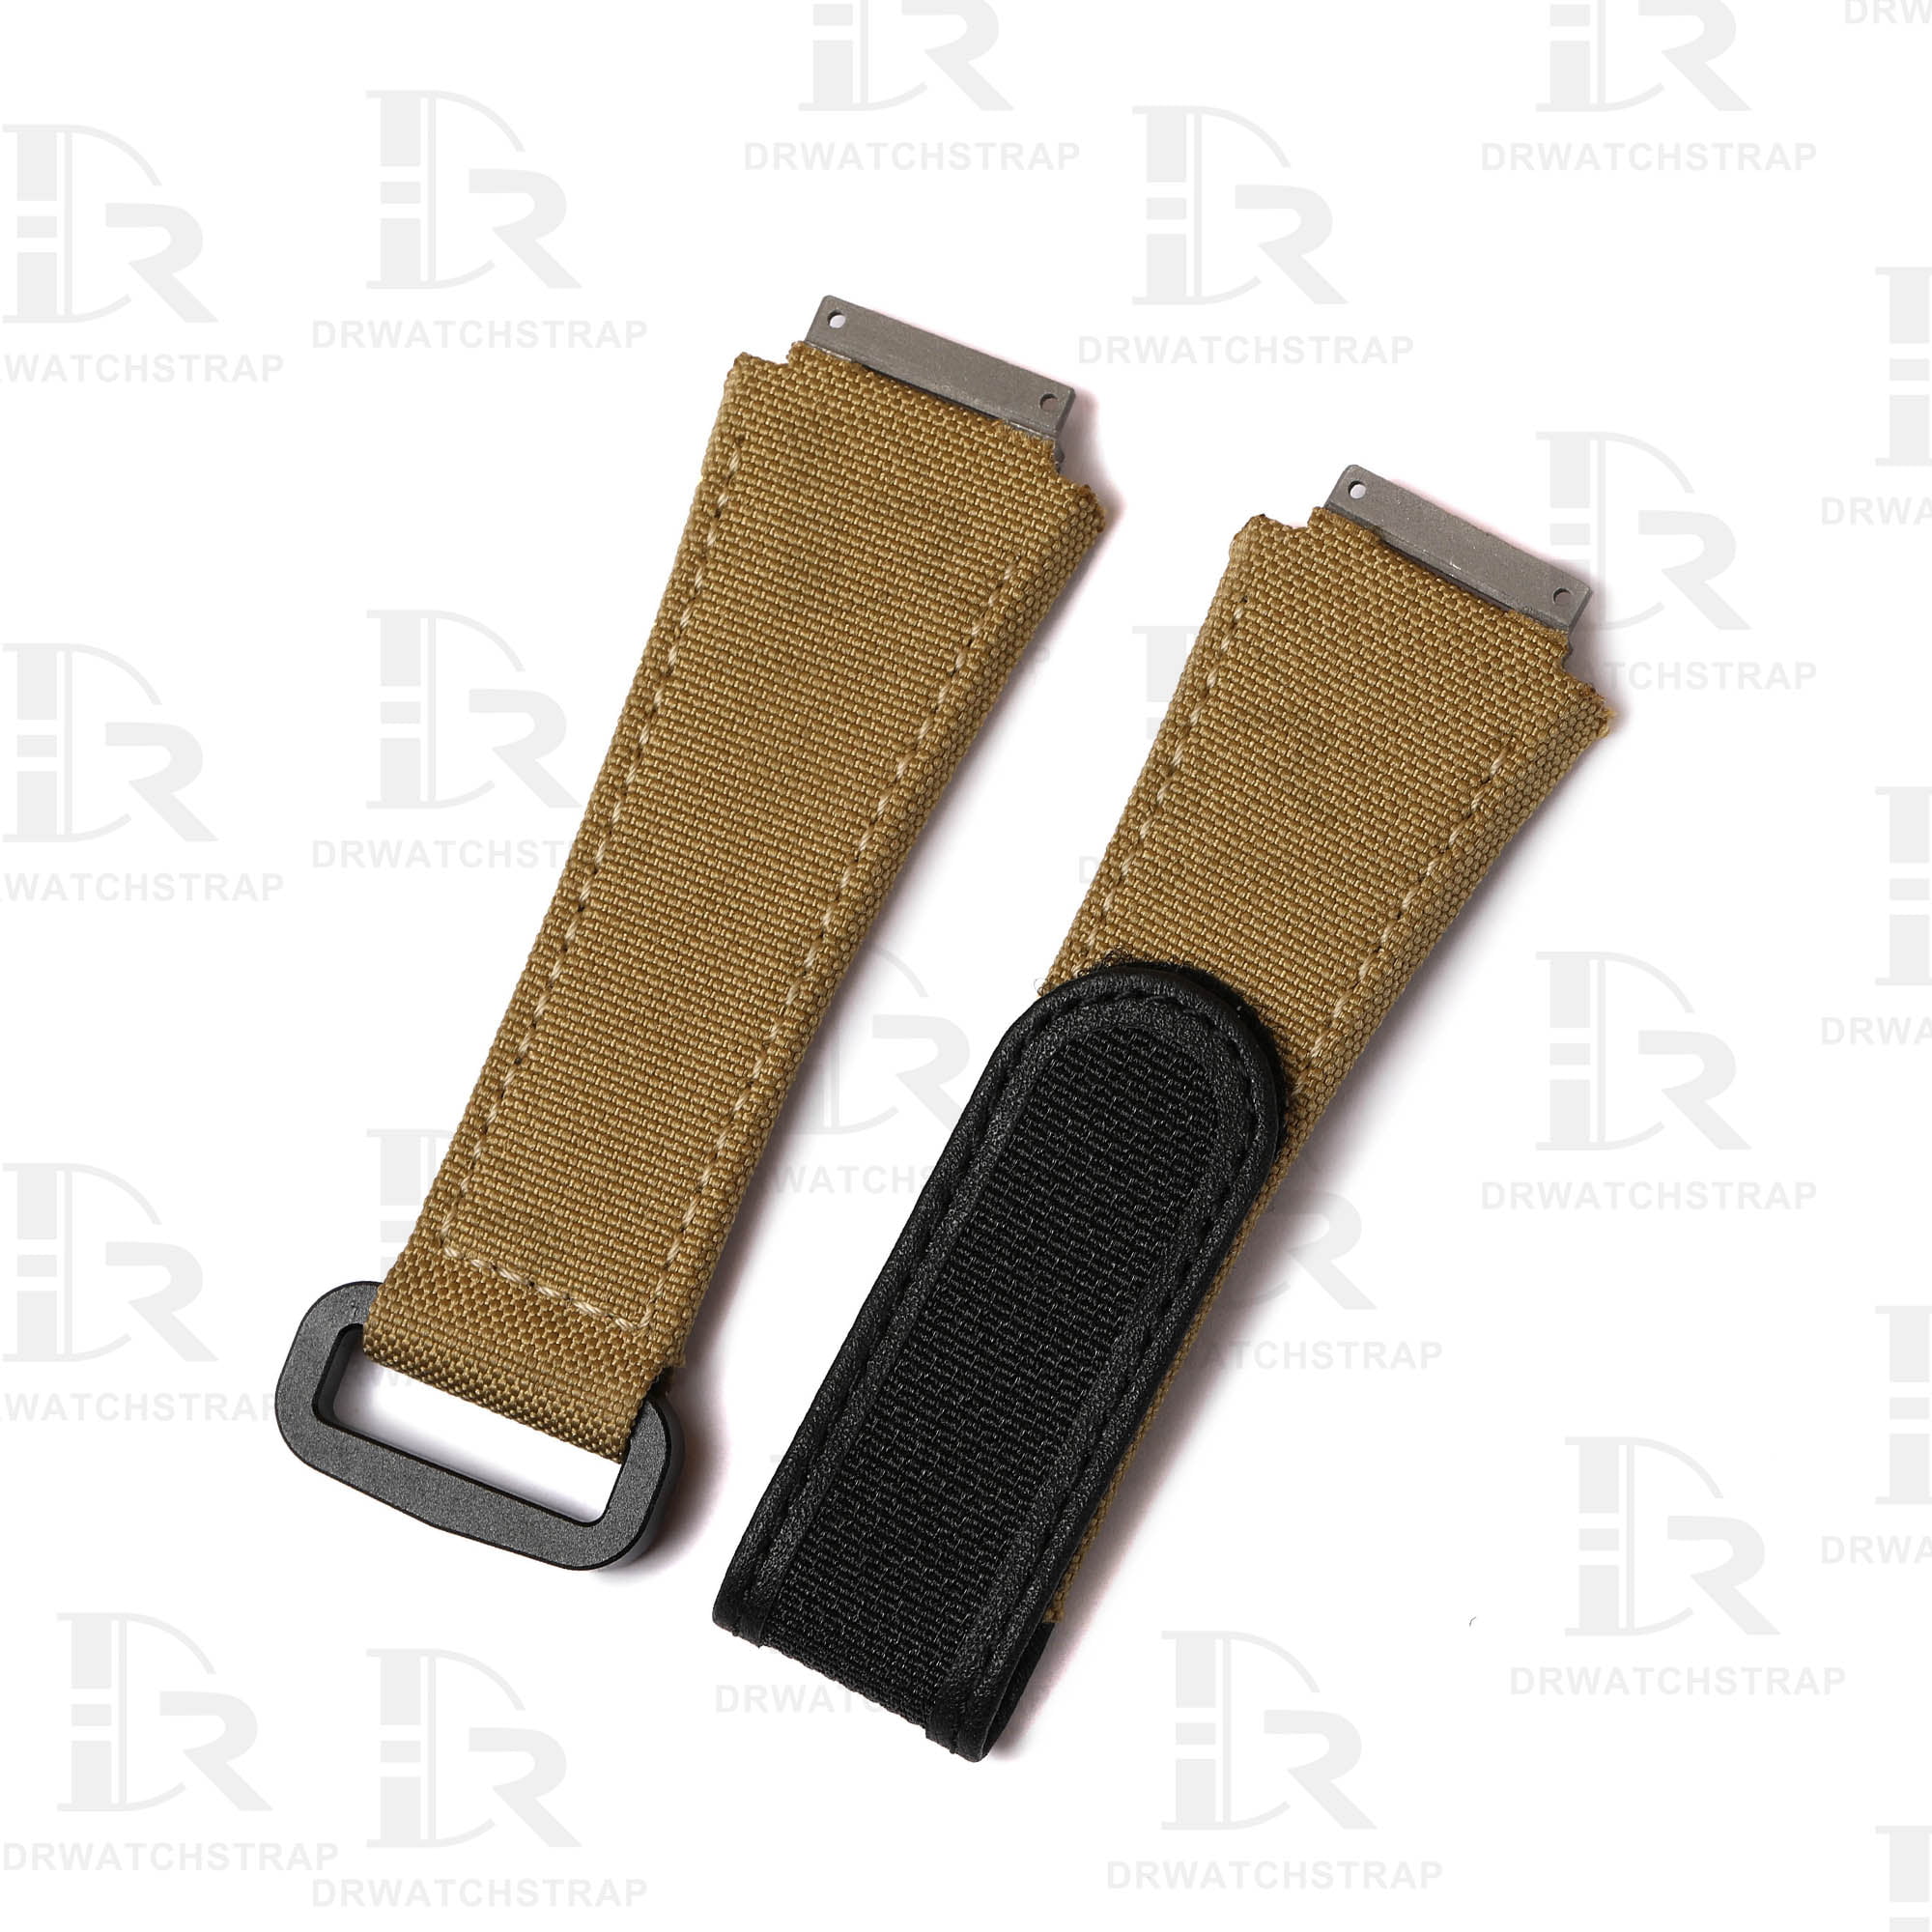 High quality olive green velcro watch strap